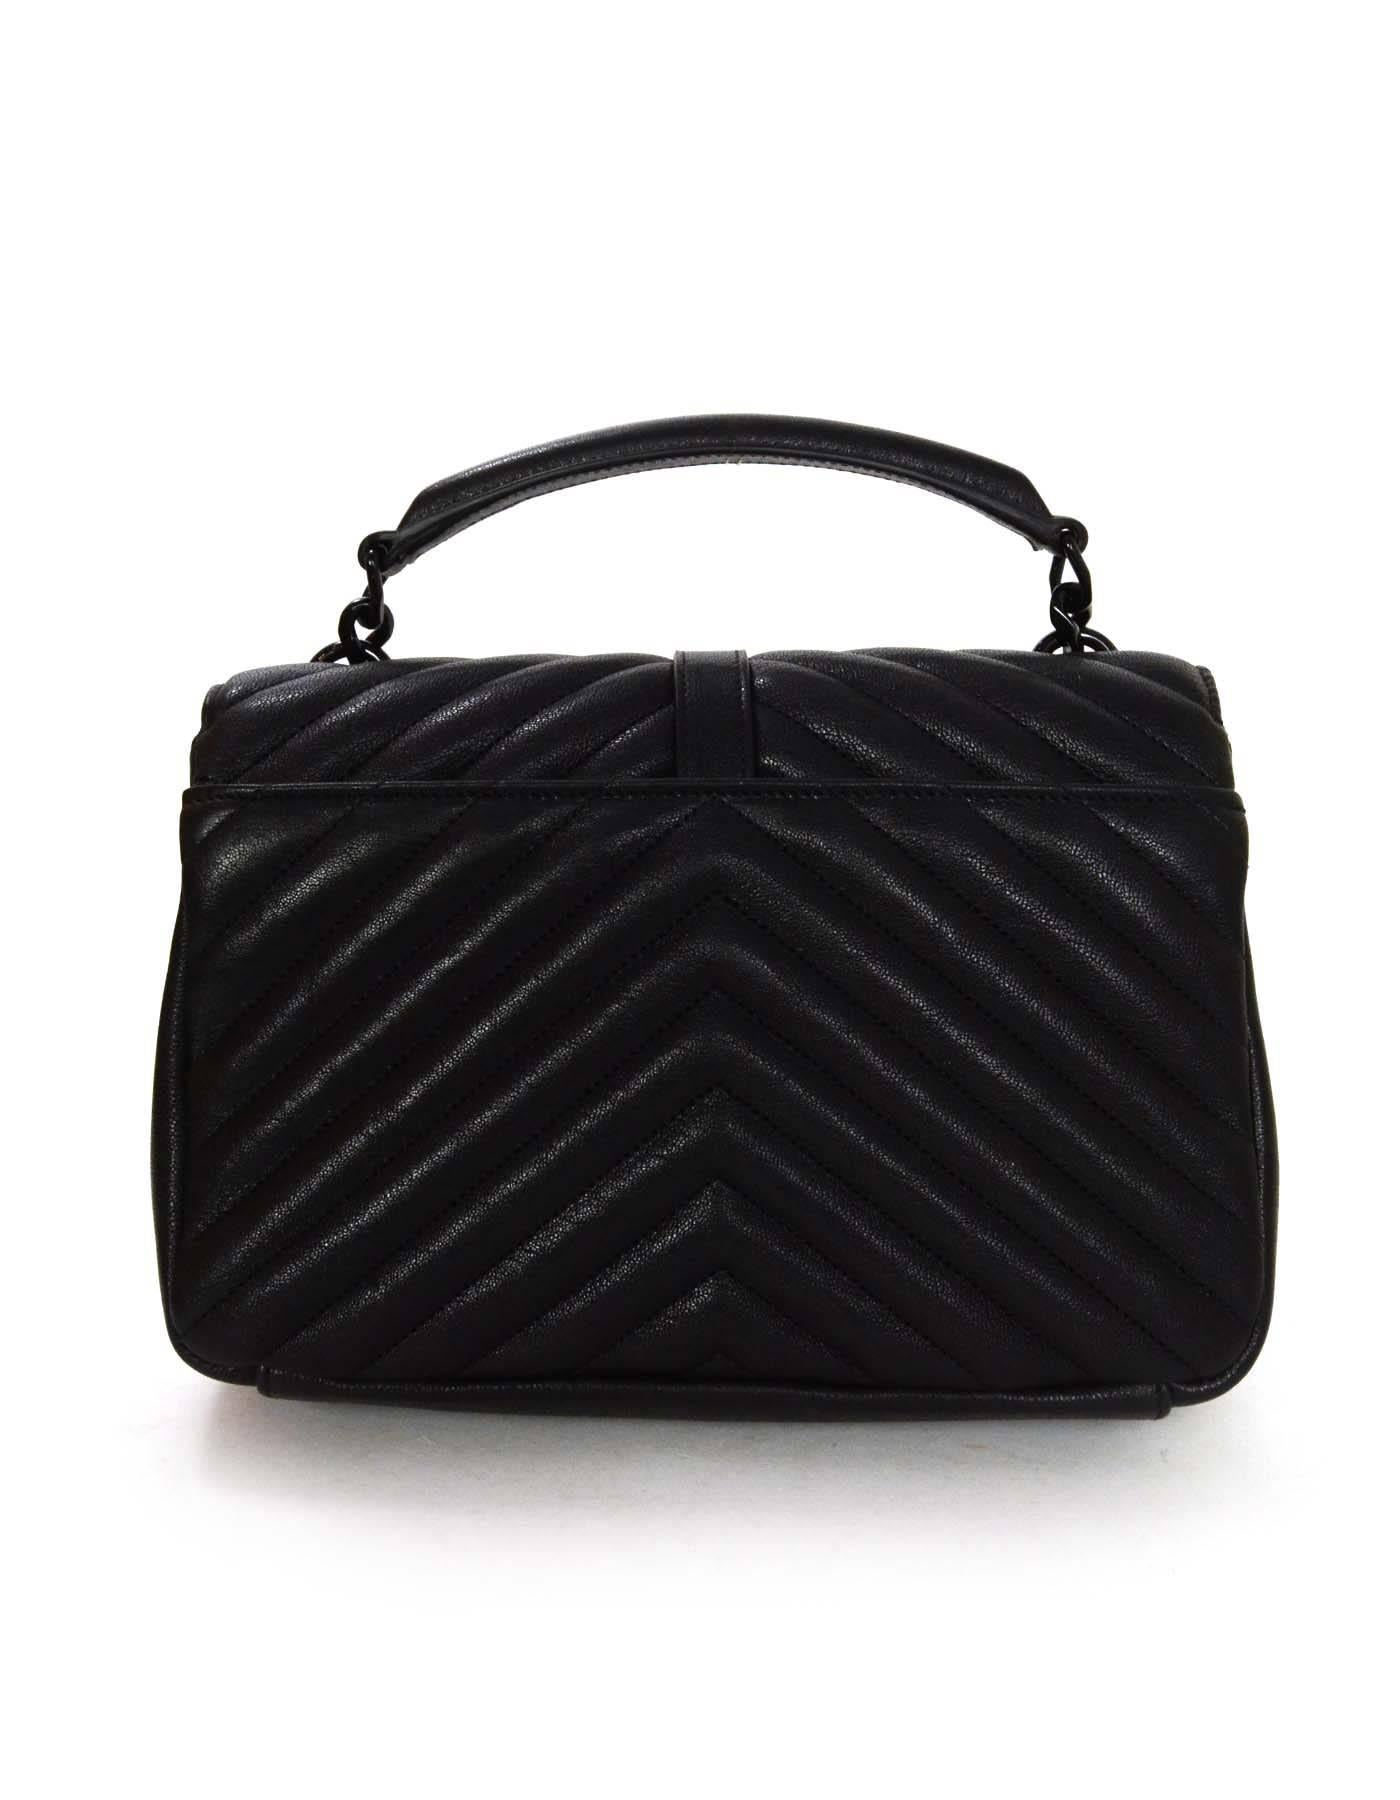 Saint Laurent Black Leather Chevron College Classic Medium Bag
Features envelope flap front with black YSL logo medallion and a curb-chain strap with leather shoulder rest
Made In: Italy
Color: Black
Hardware: Black
Materials: Metal and